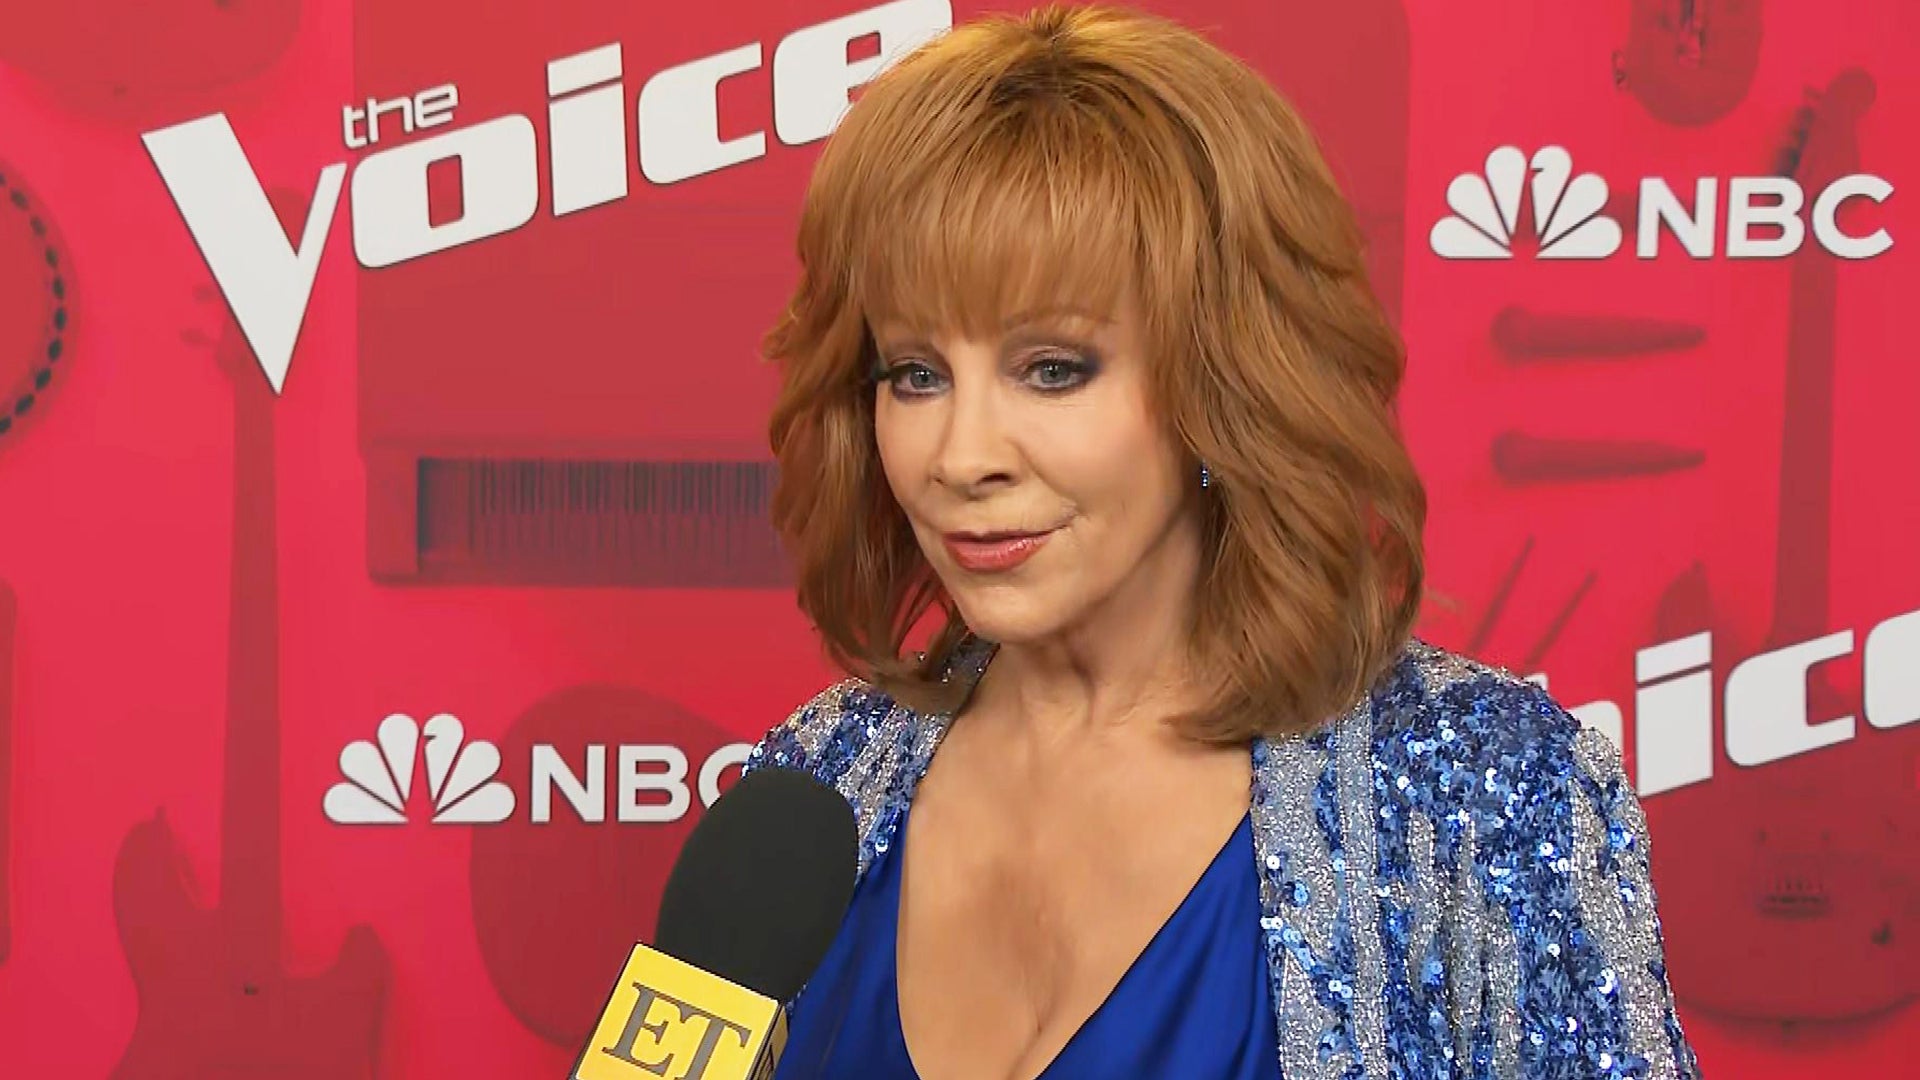 1920px x 1080px - The Voice': Reba McEntire on How She Kept New Coaching Gig a Secret  (Exclusive)